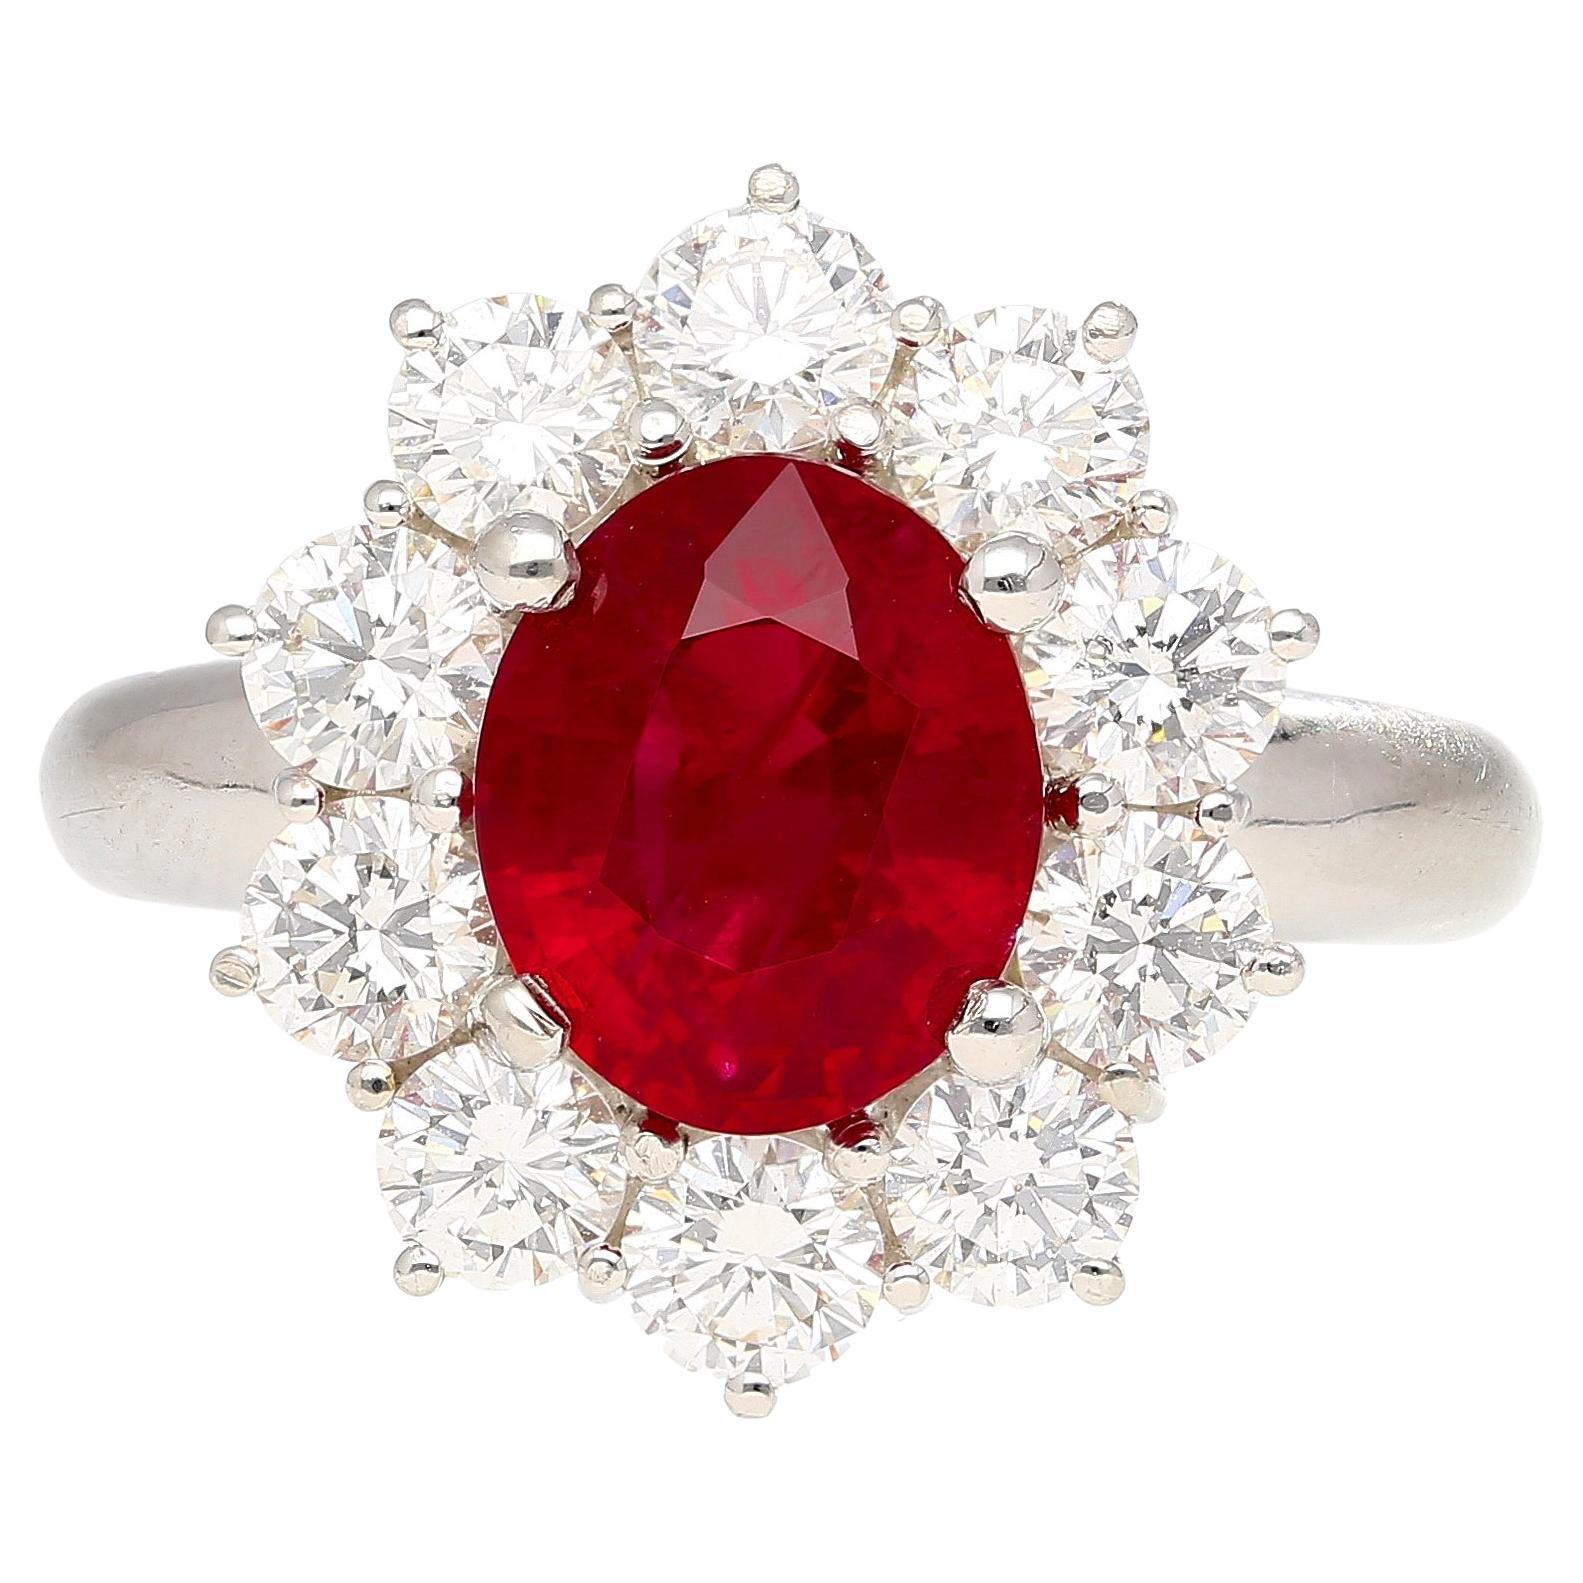 3 Carat Vivid Red Pigeons Blood Burma Ruby Ring with Diamonds in Platinum & Gold For Sale